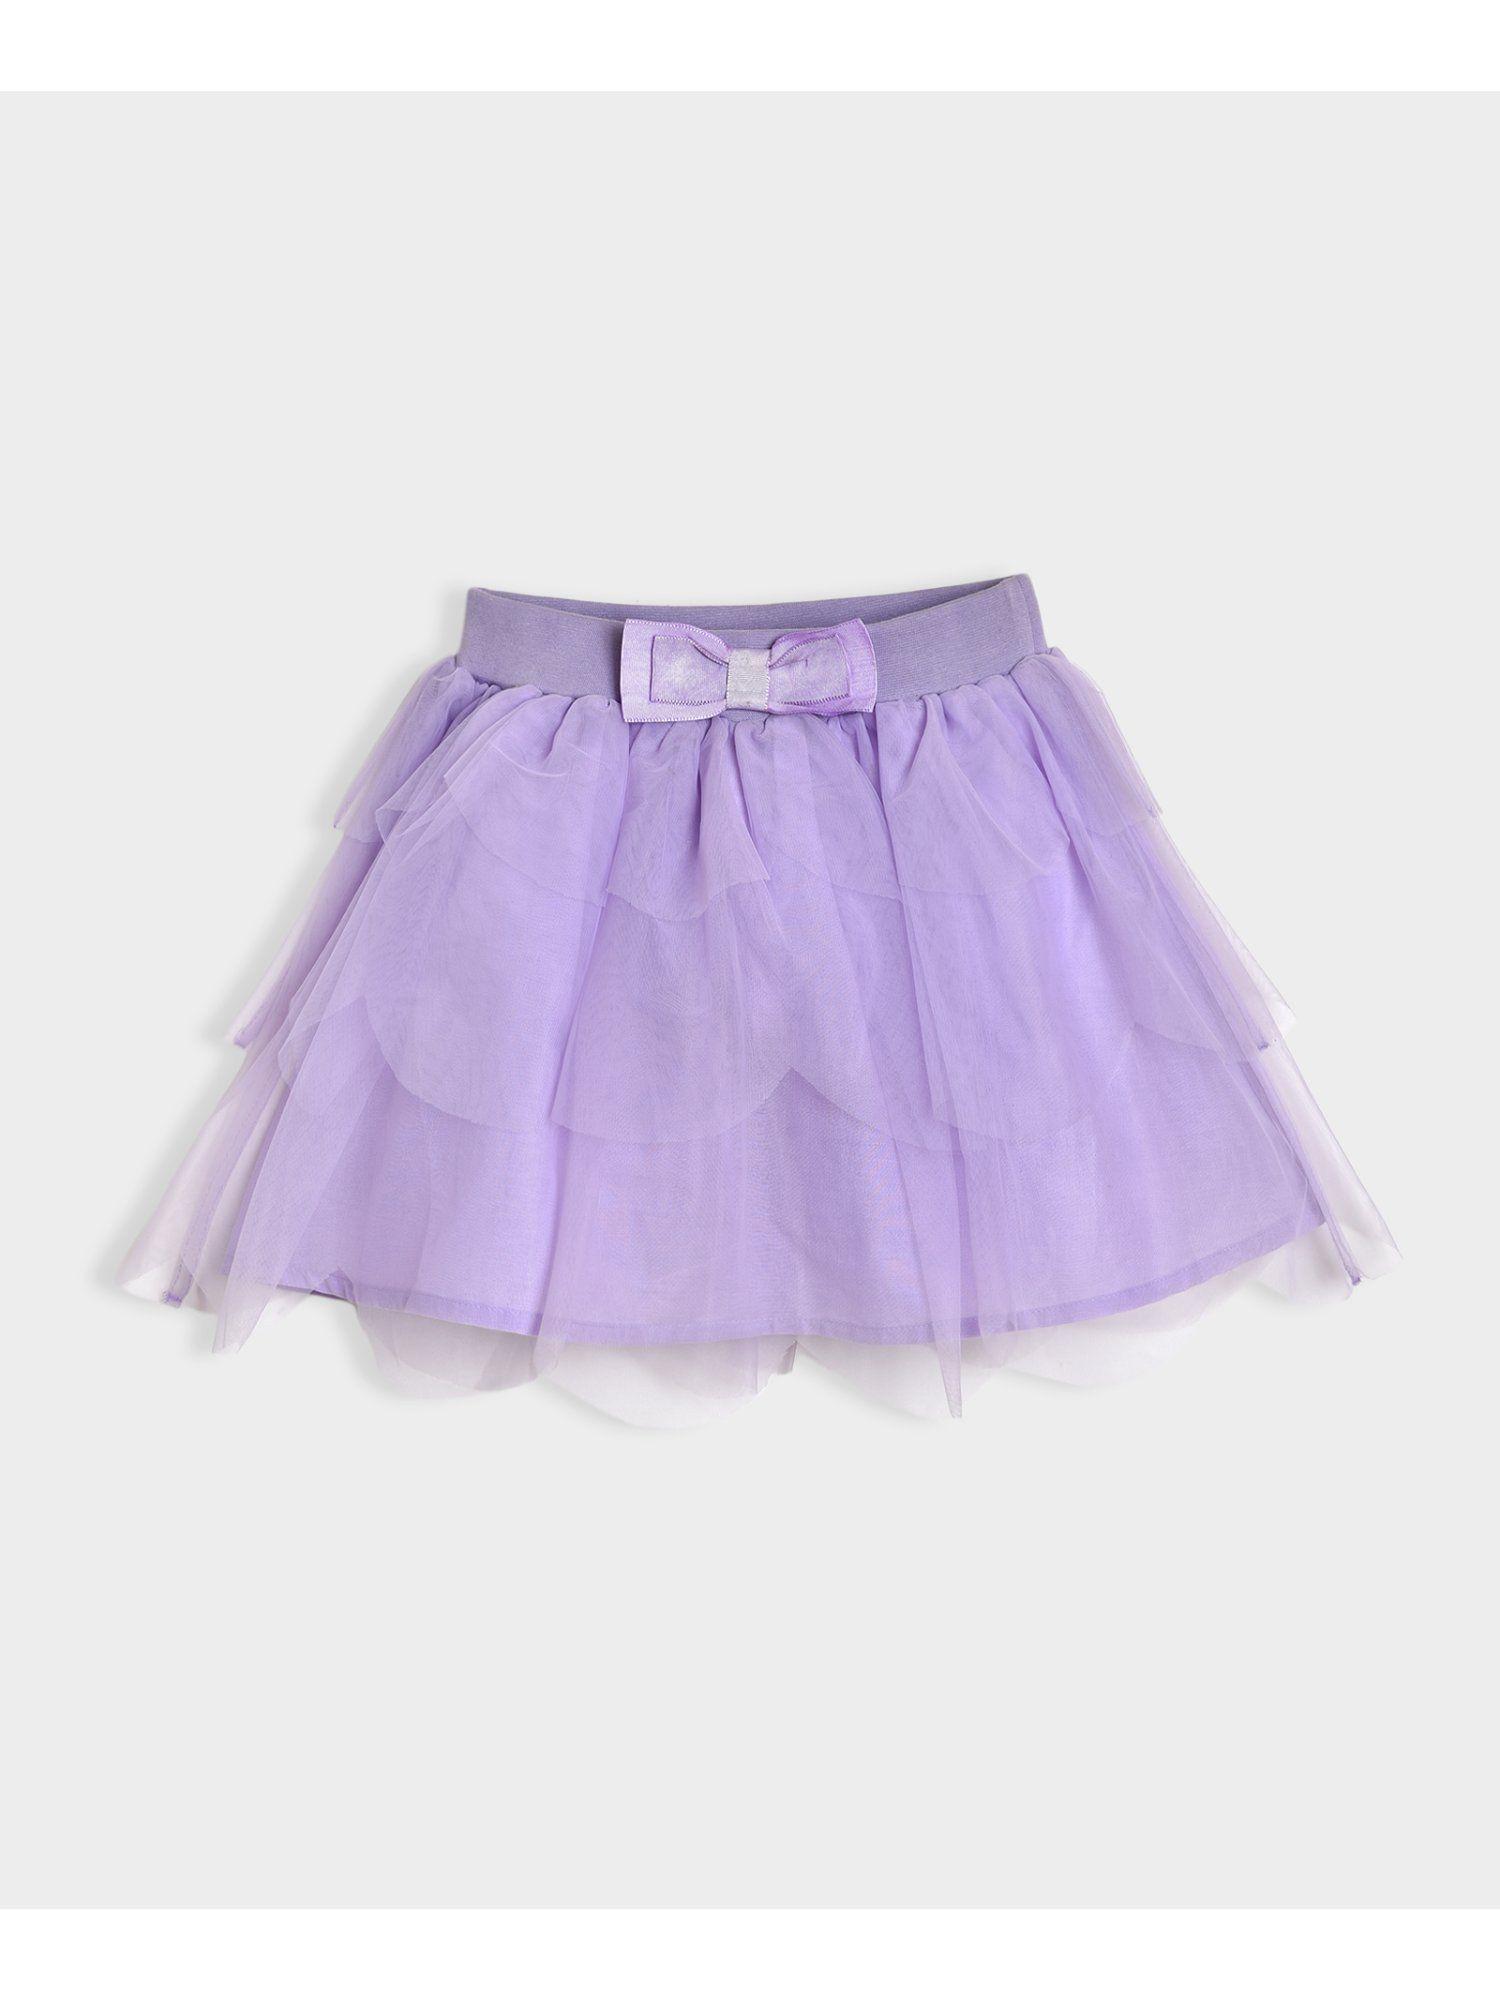 purple-cotton-lining-with-net-skirt-for-girls